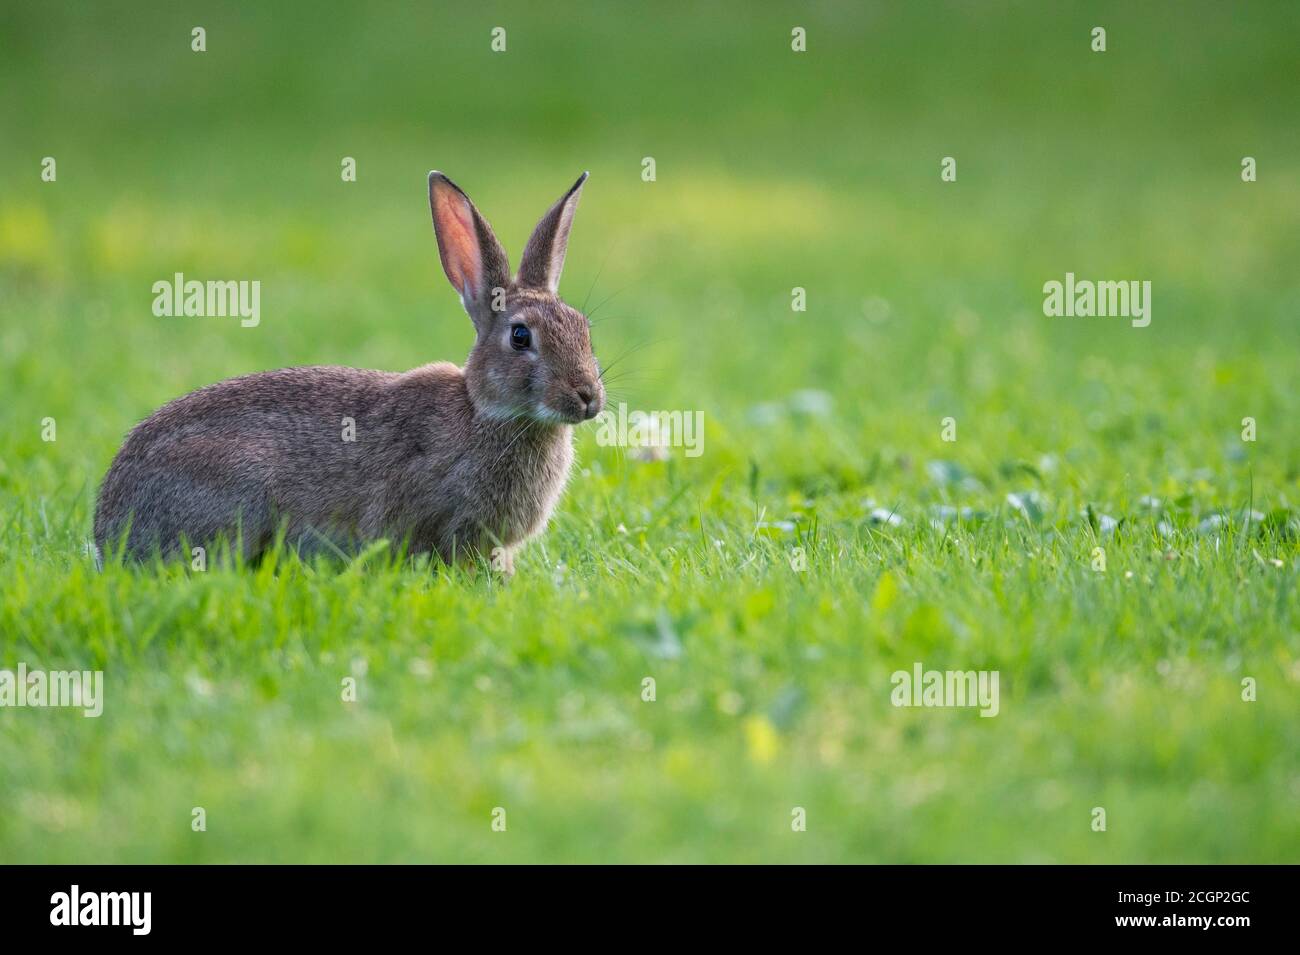 European rabbit (Oryctolagus cuniculus) in a meadow, attentive, pointed ears, Lower Saxony, Germany Stock Photo